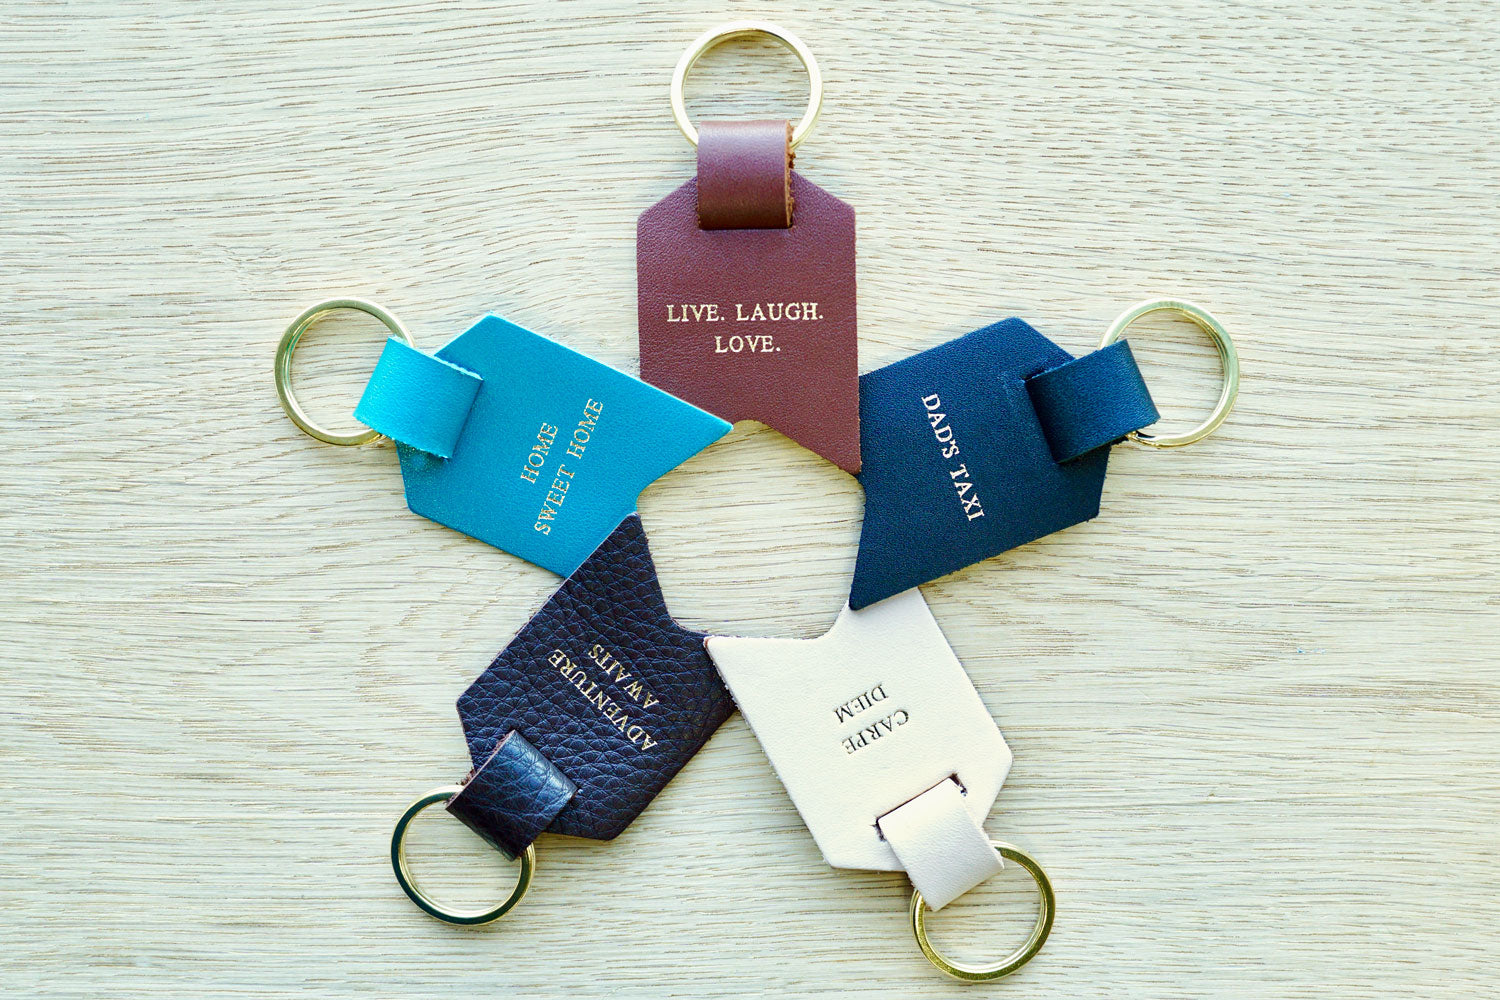 Personalised Keyrings for Dad from Bookshell Bindery, available in Black, Dark Brown, Light Brown, Turquoise blue and Cream